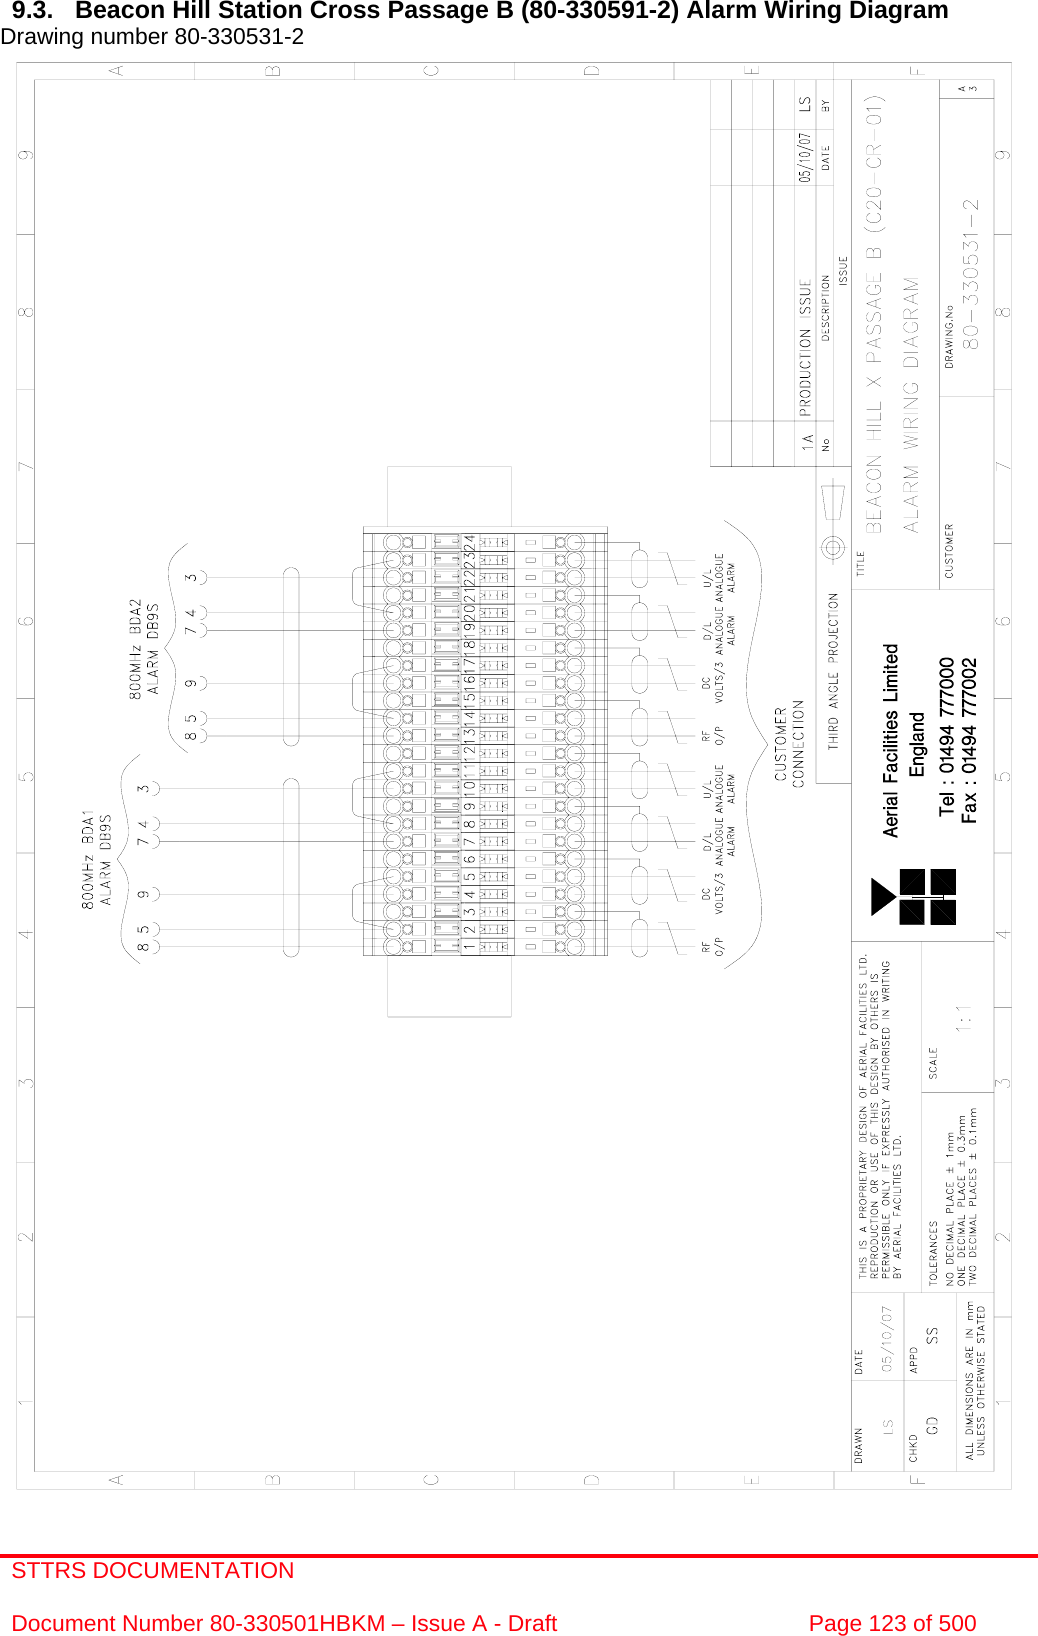 STTRS DOCUMENTATION  Document Number 80-330501HBKM – Issue A - Draft  Page 123 of 500   9.3.  Beacon Hill Station Cross Passage B (80-330591-2) Alarm Wiring Diagram Drawing number 80-330531-2                                                       